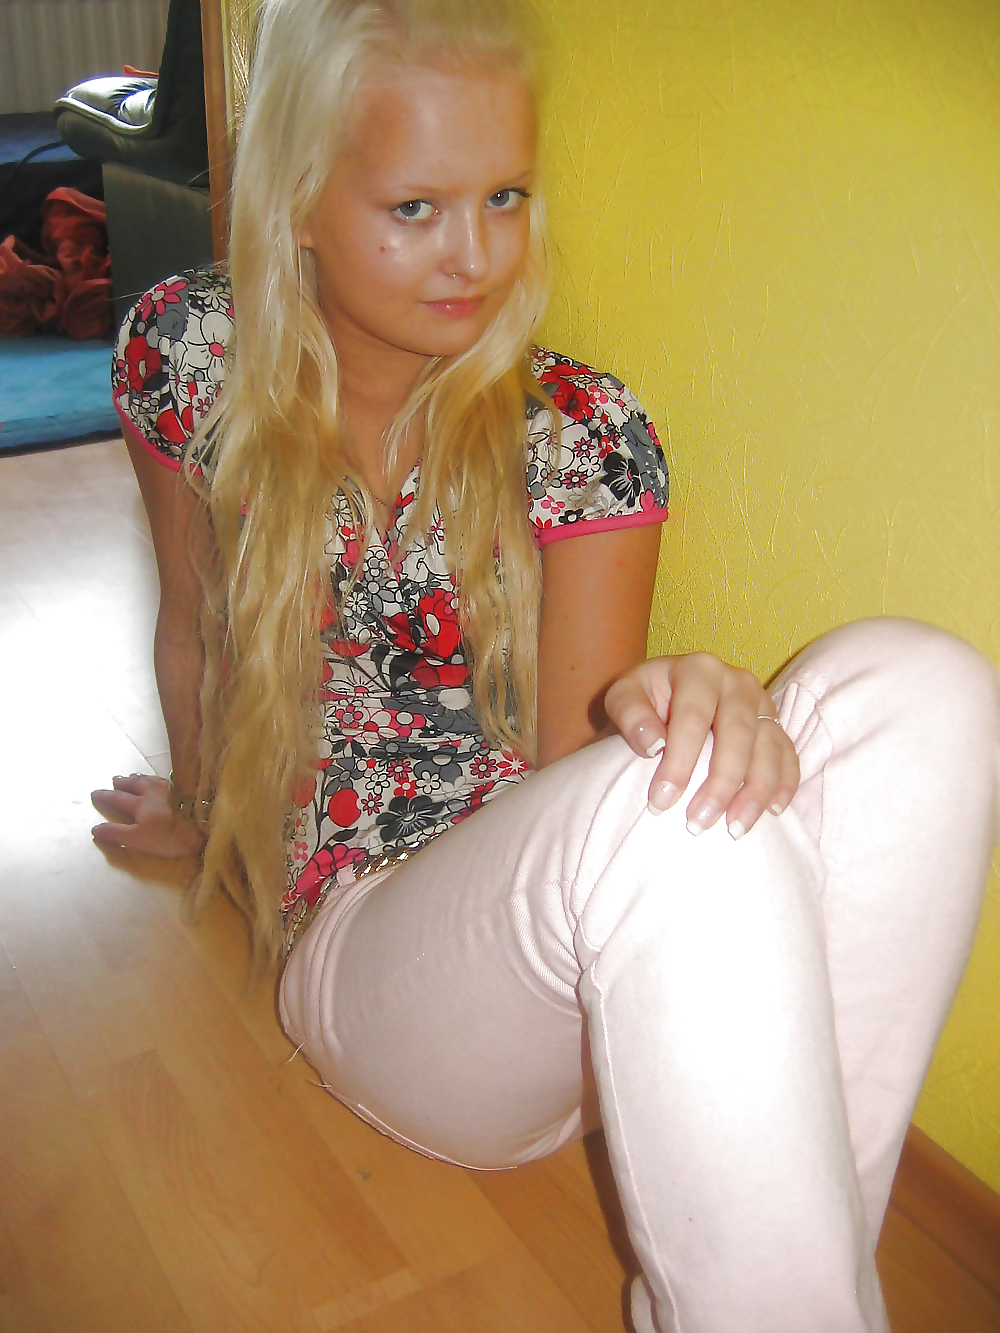 amateur teen linda 18 from germany hot adult photos